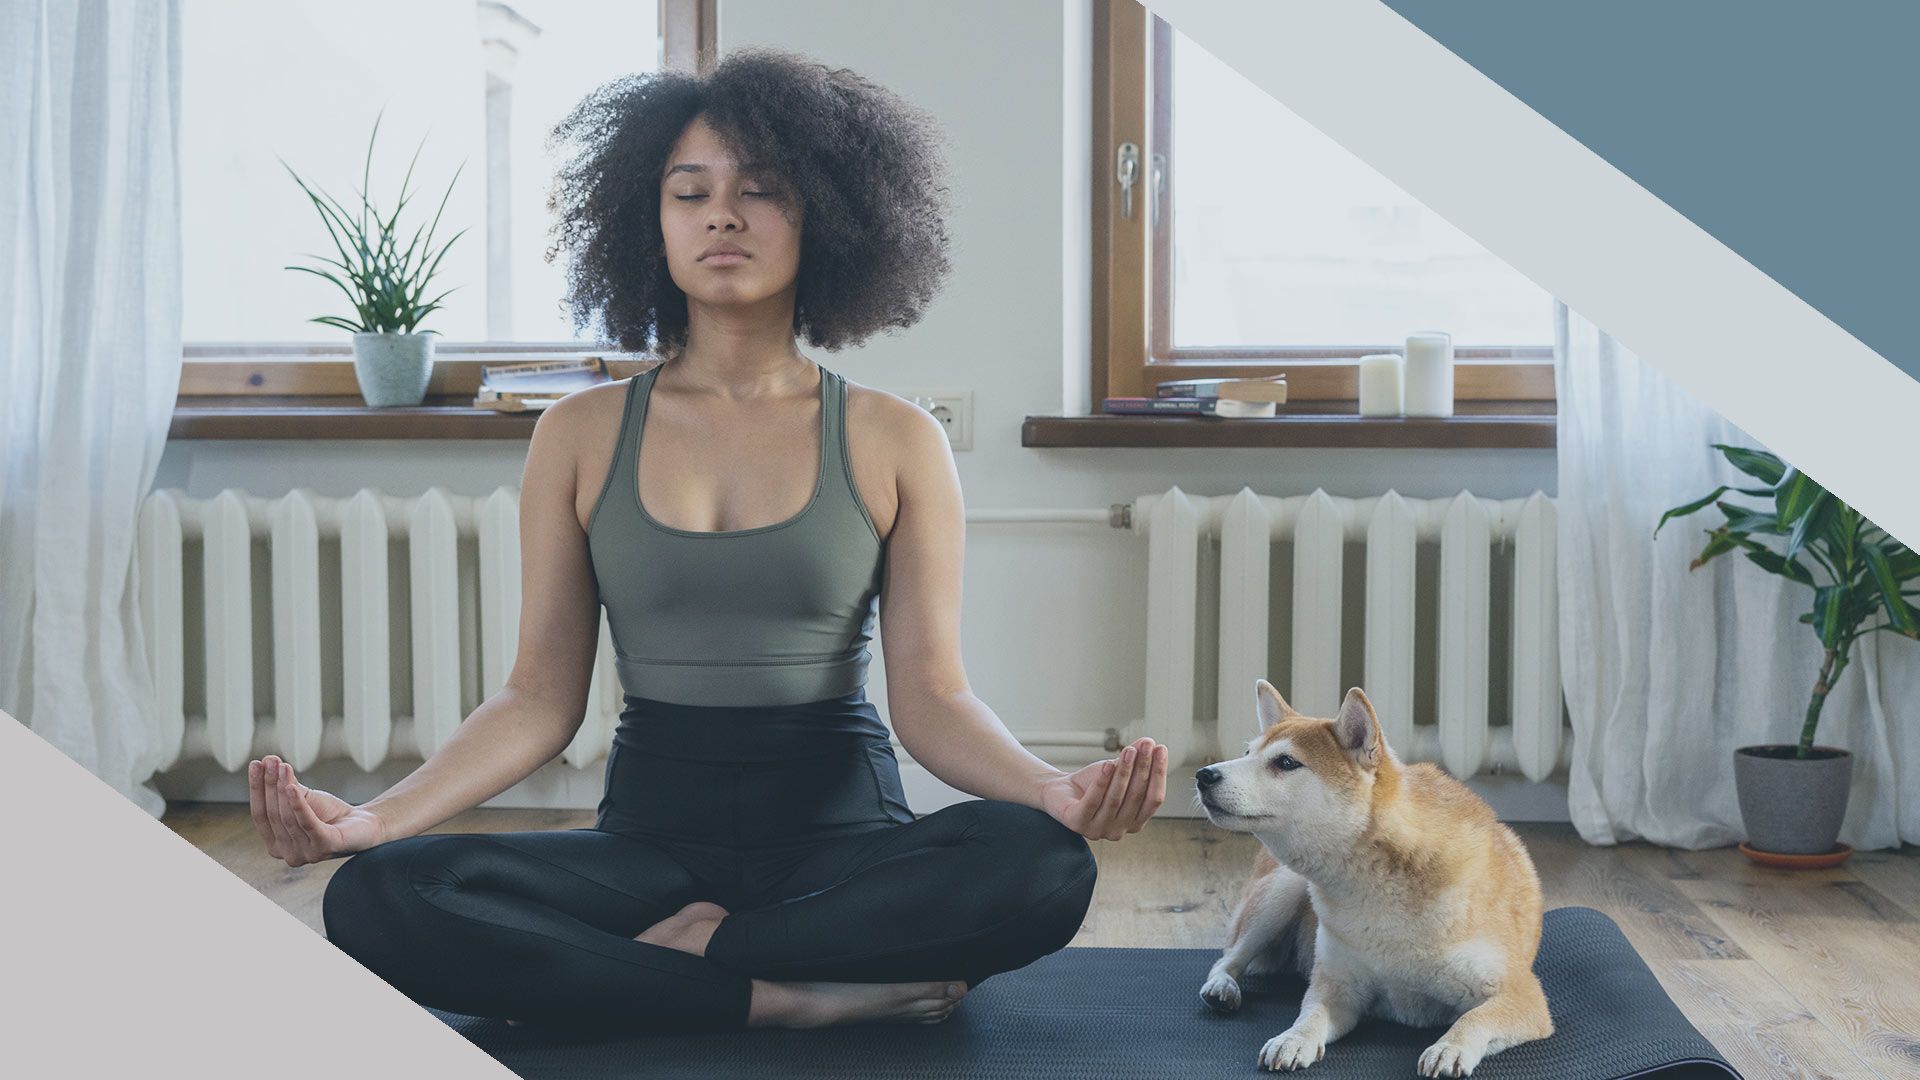 How to Use Meditation to Boost Focus and Productivity While WFH